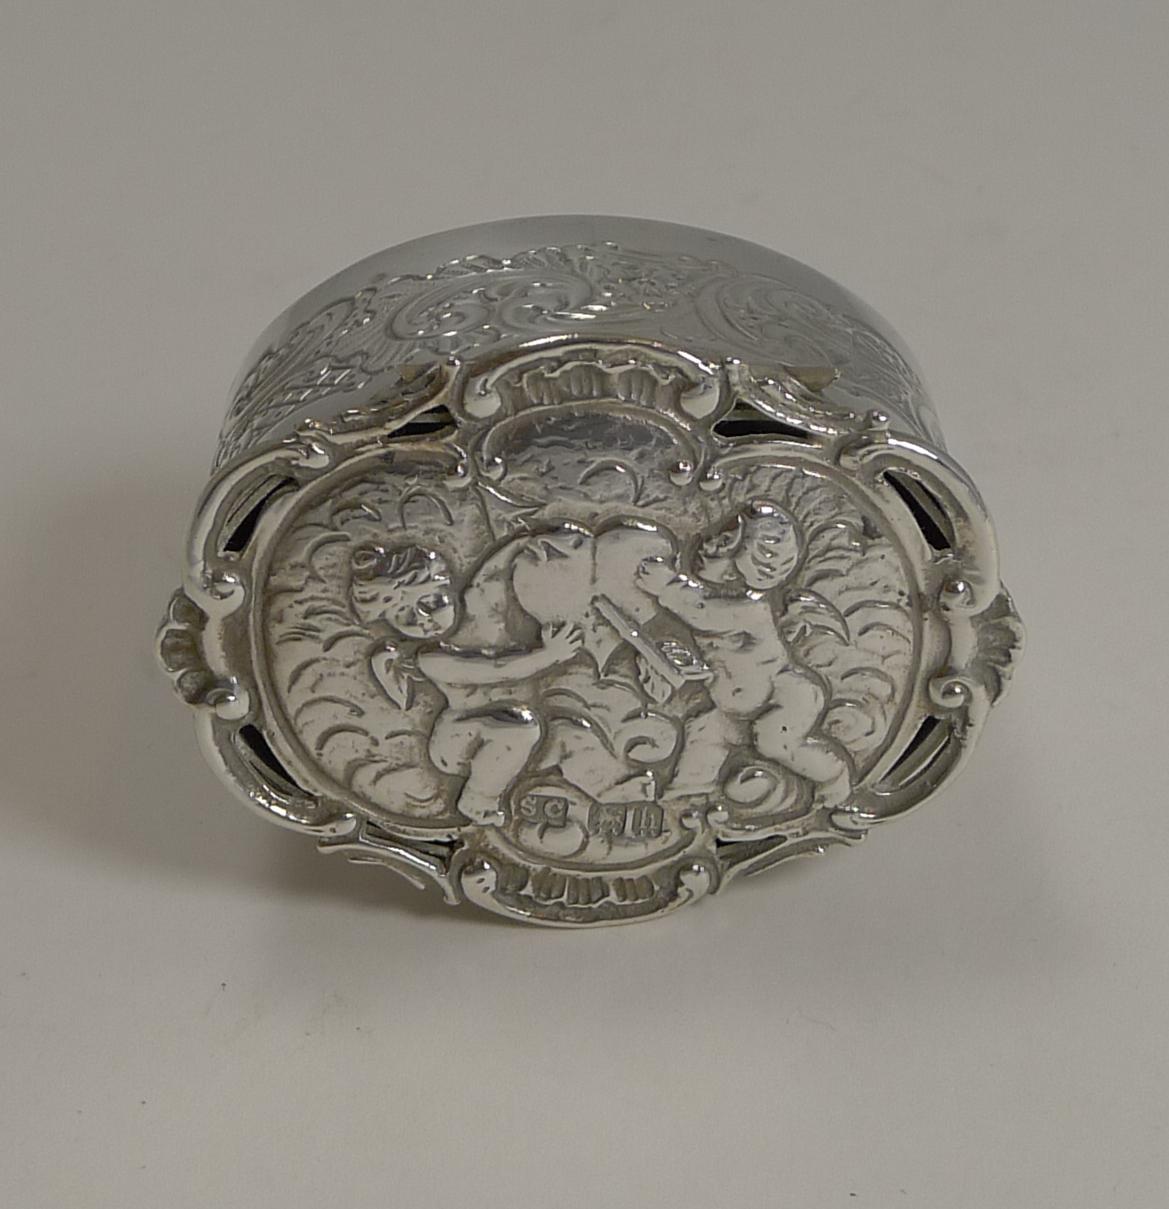 About as charming and romantic as they come, this Edwardian silver box has a beautifully decorated hinged lid with a cherub either side of a heart with an arrow through it. The shaped border of the lid has some pierced or reticulated